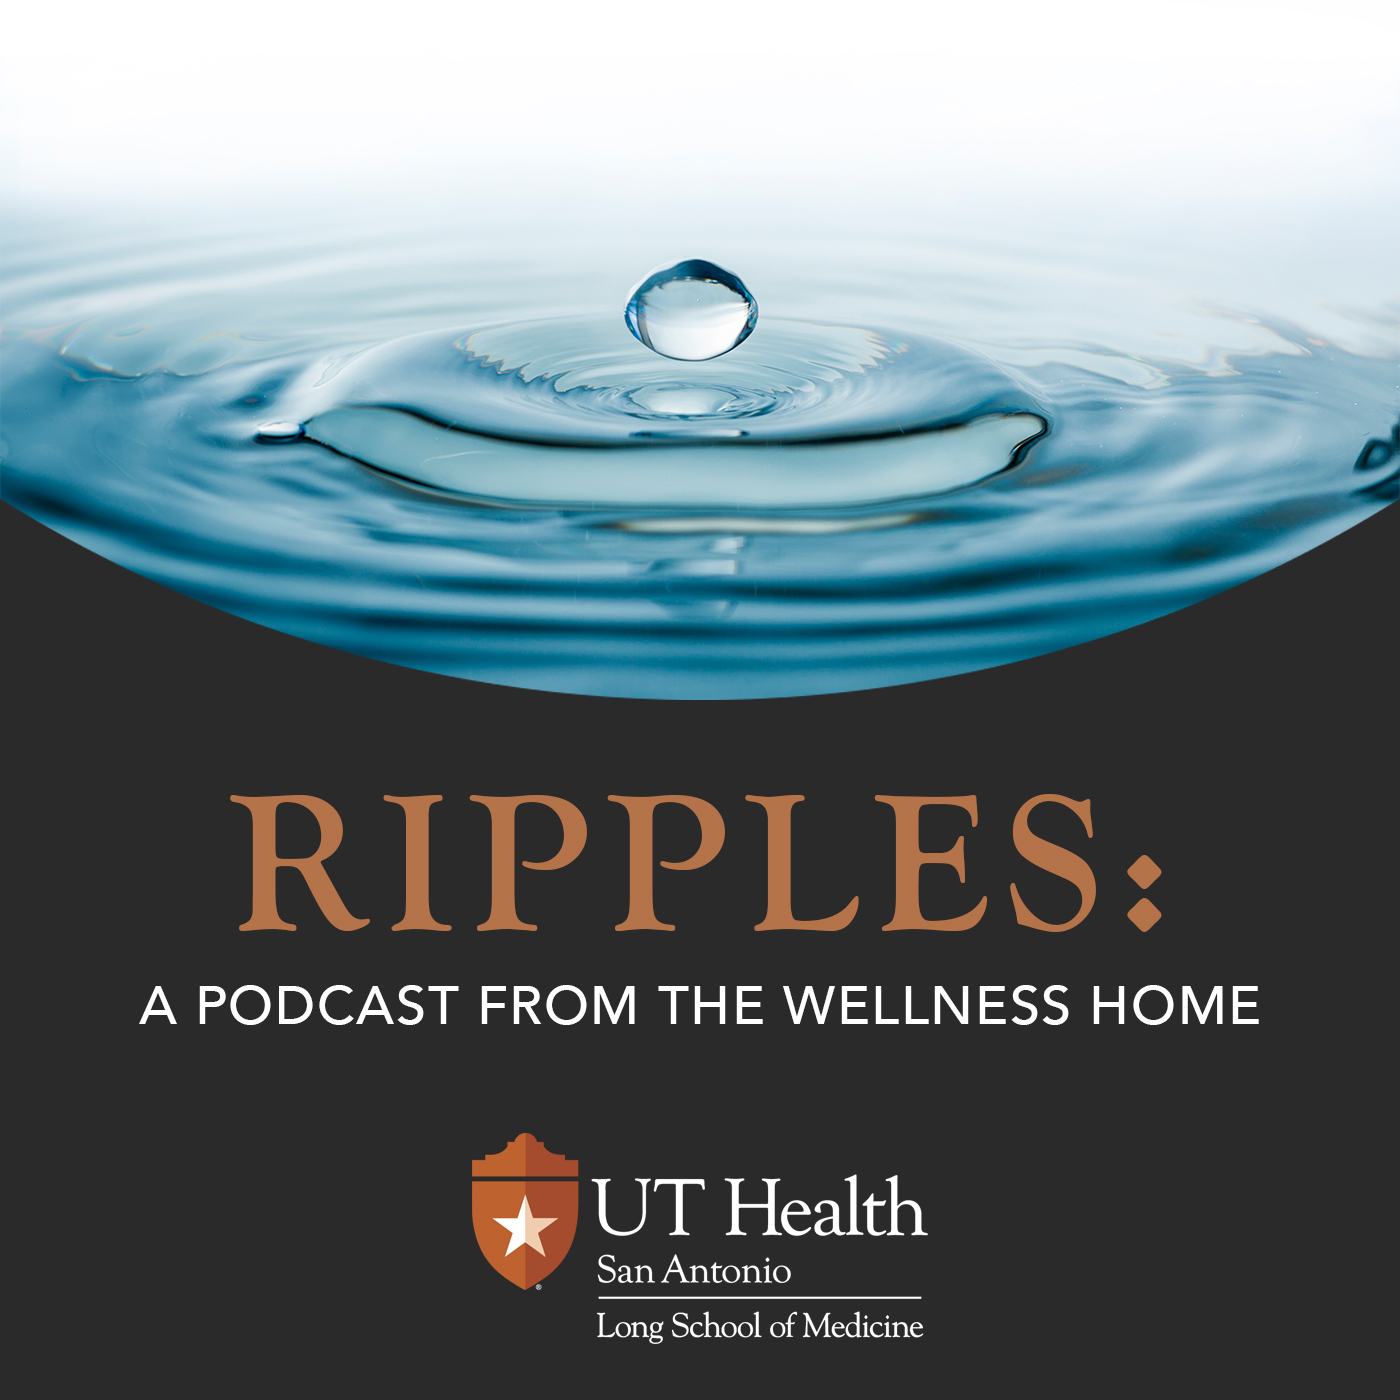 Ripples: A Podcast from the Wellness Home UT Health San Antonio Long School of Medicine